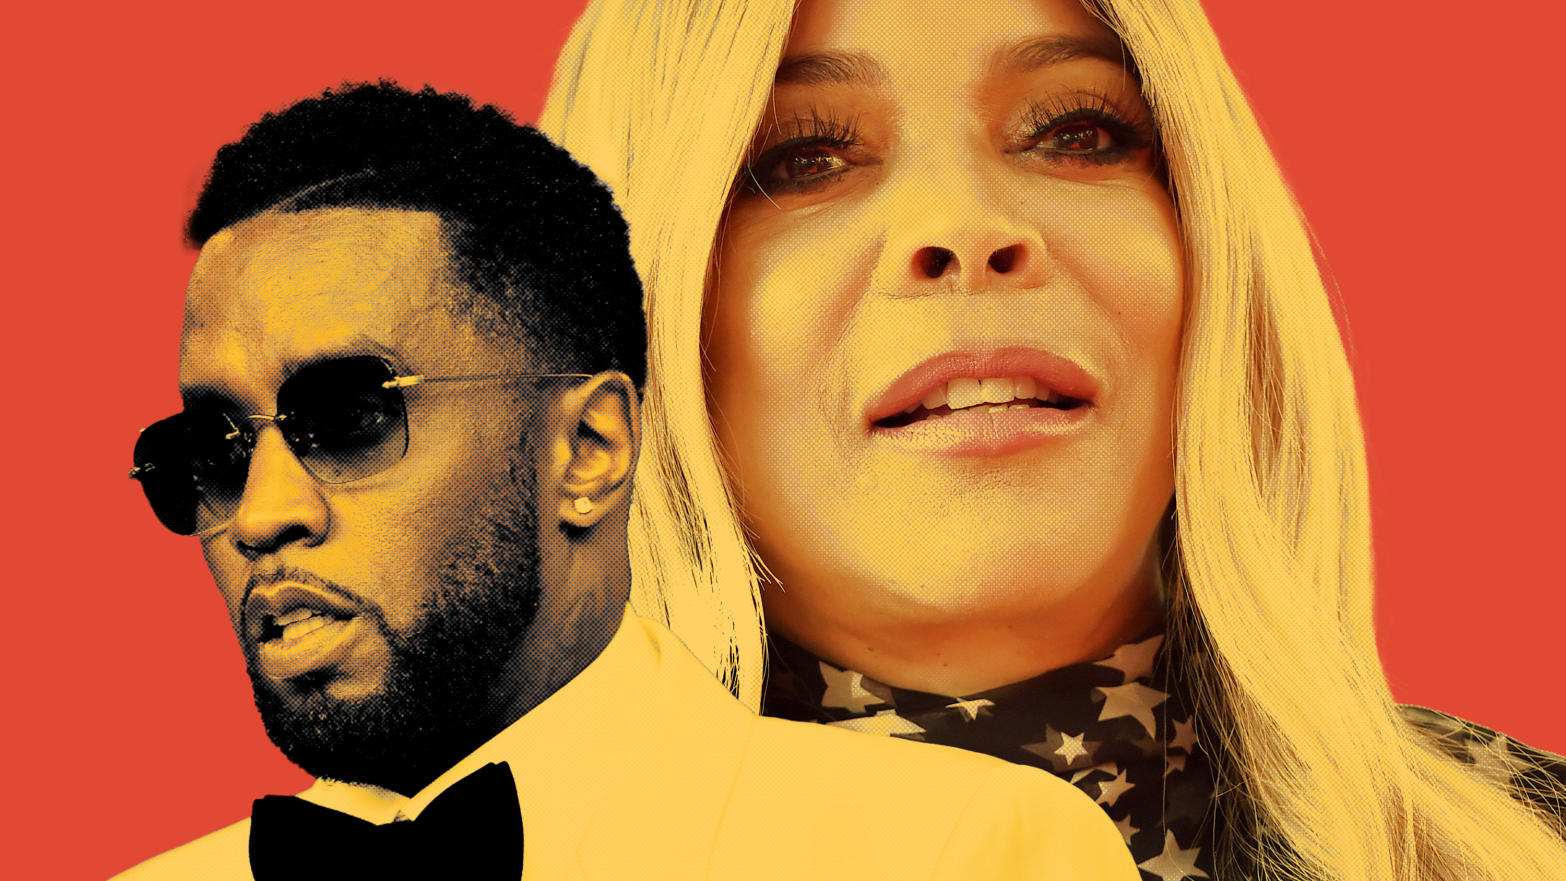 Photo illustration of Diddy and Wendy Williams on an orange background.